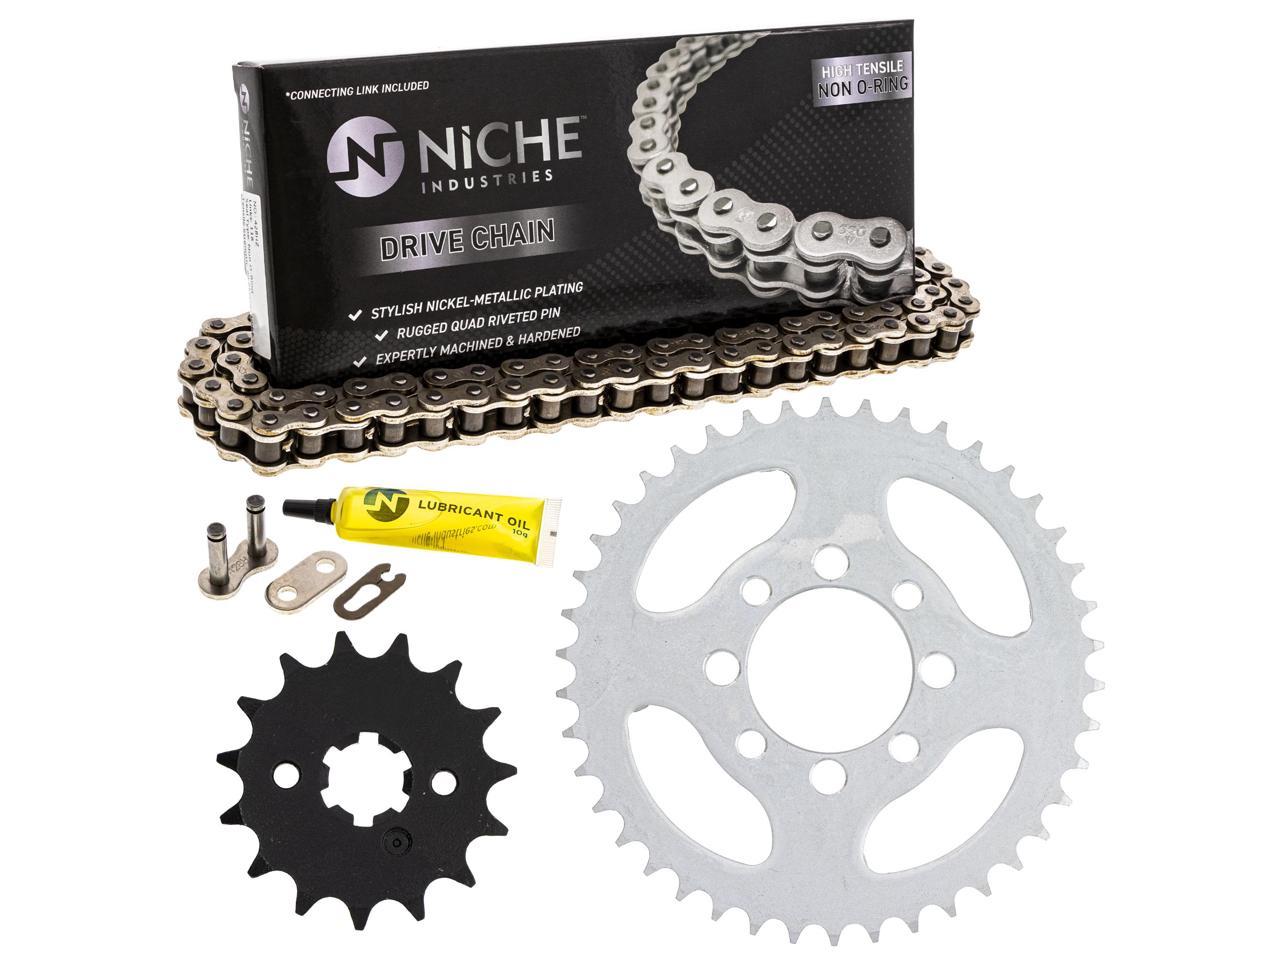 NICHE Drive Sprocket Chain Combo for Honda CBR600 CB600 Front 16 Rear 43 Tooth 525V O-Ring 118 Links 